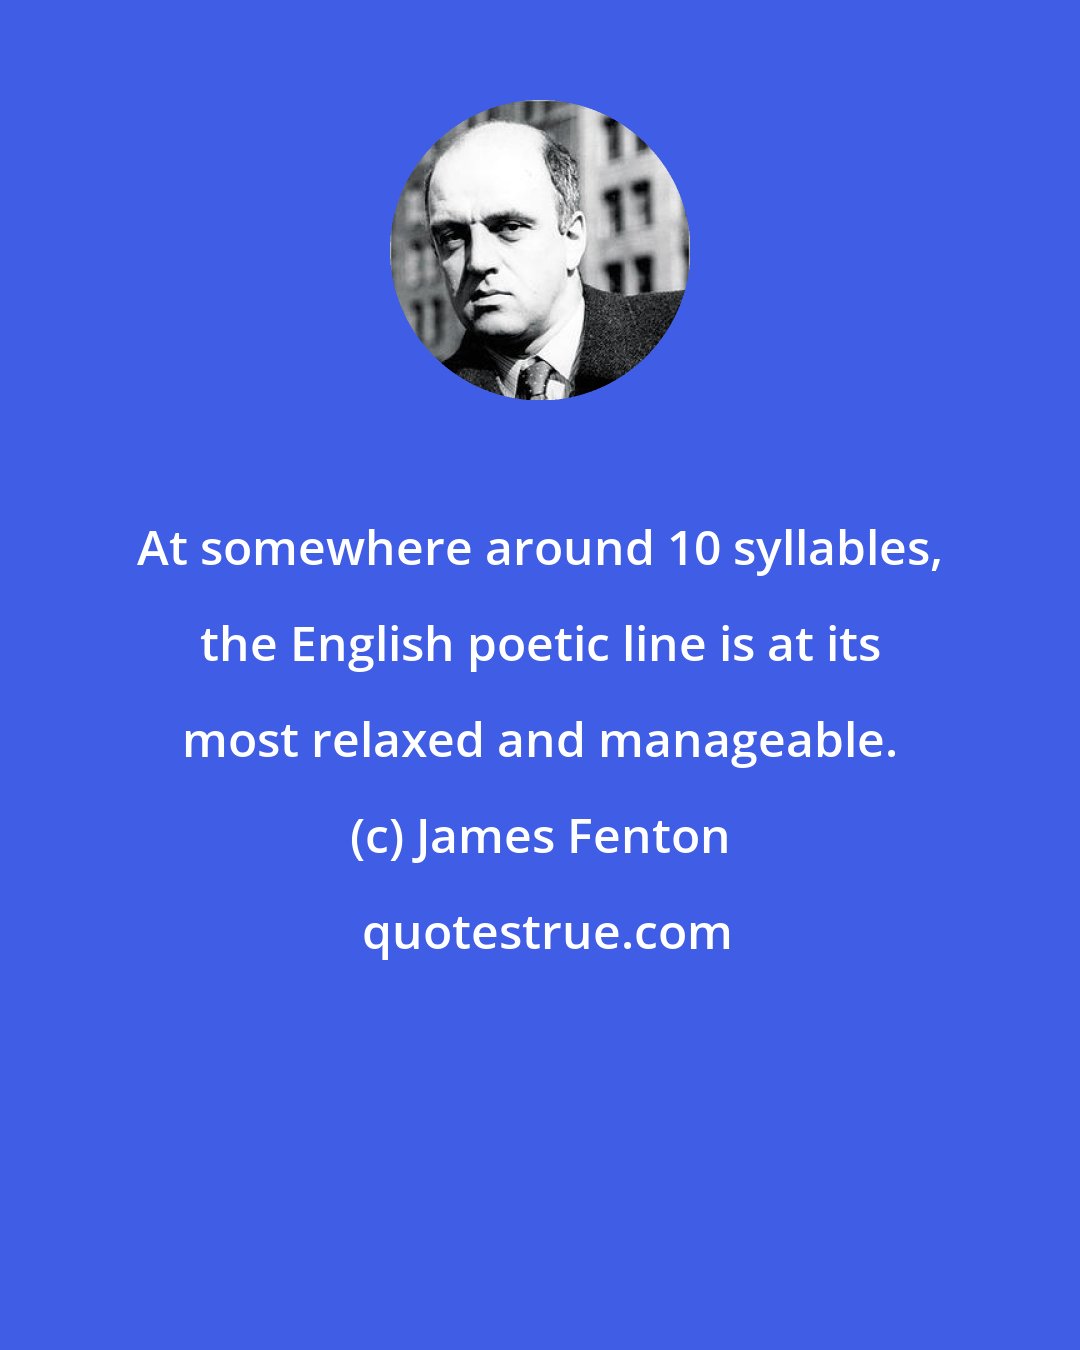 James Fenton: At somewhere around 10 syllables, the English poetic line is at its most relaxed and manageable.